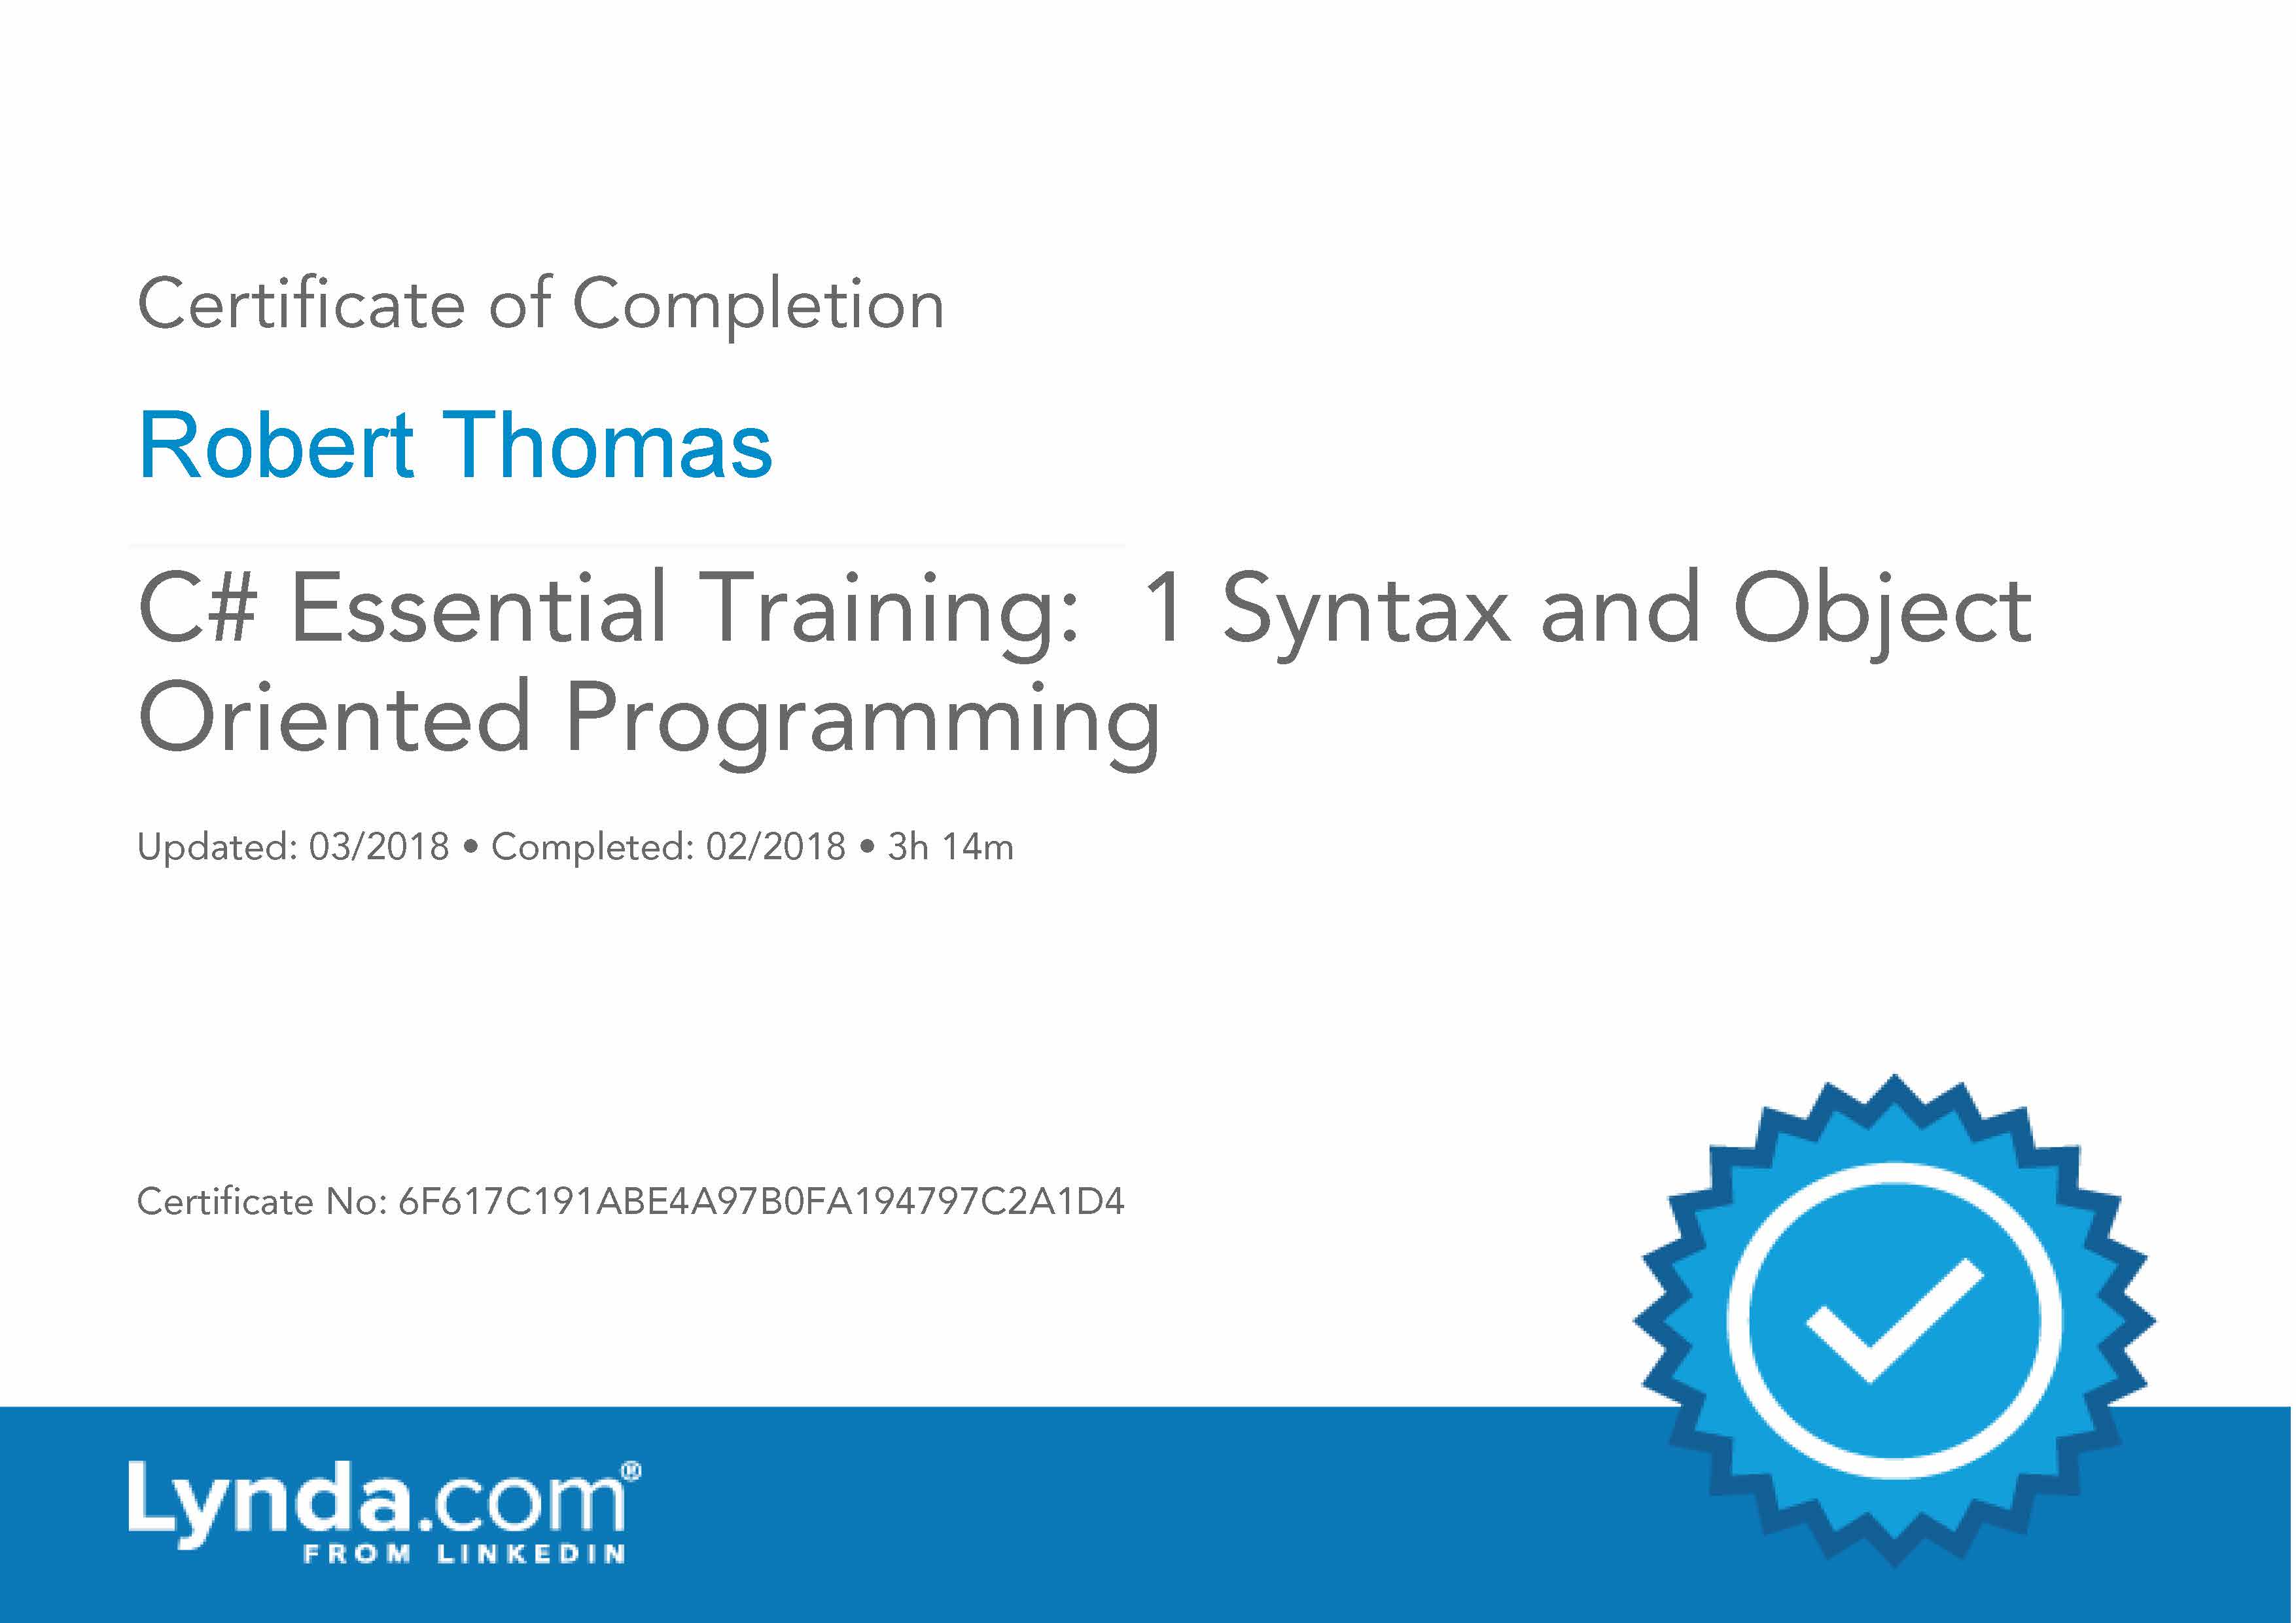 C# EssentialTraining - 1 Syntax and Object Oriented Programming - Certificate Of Completion